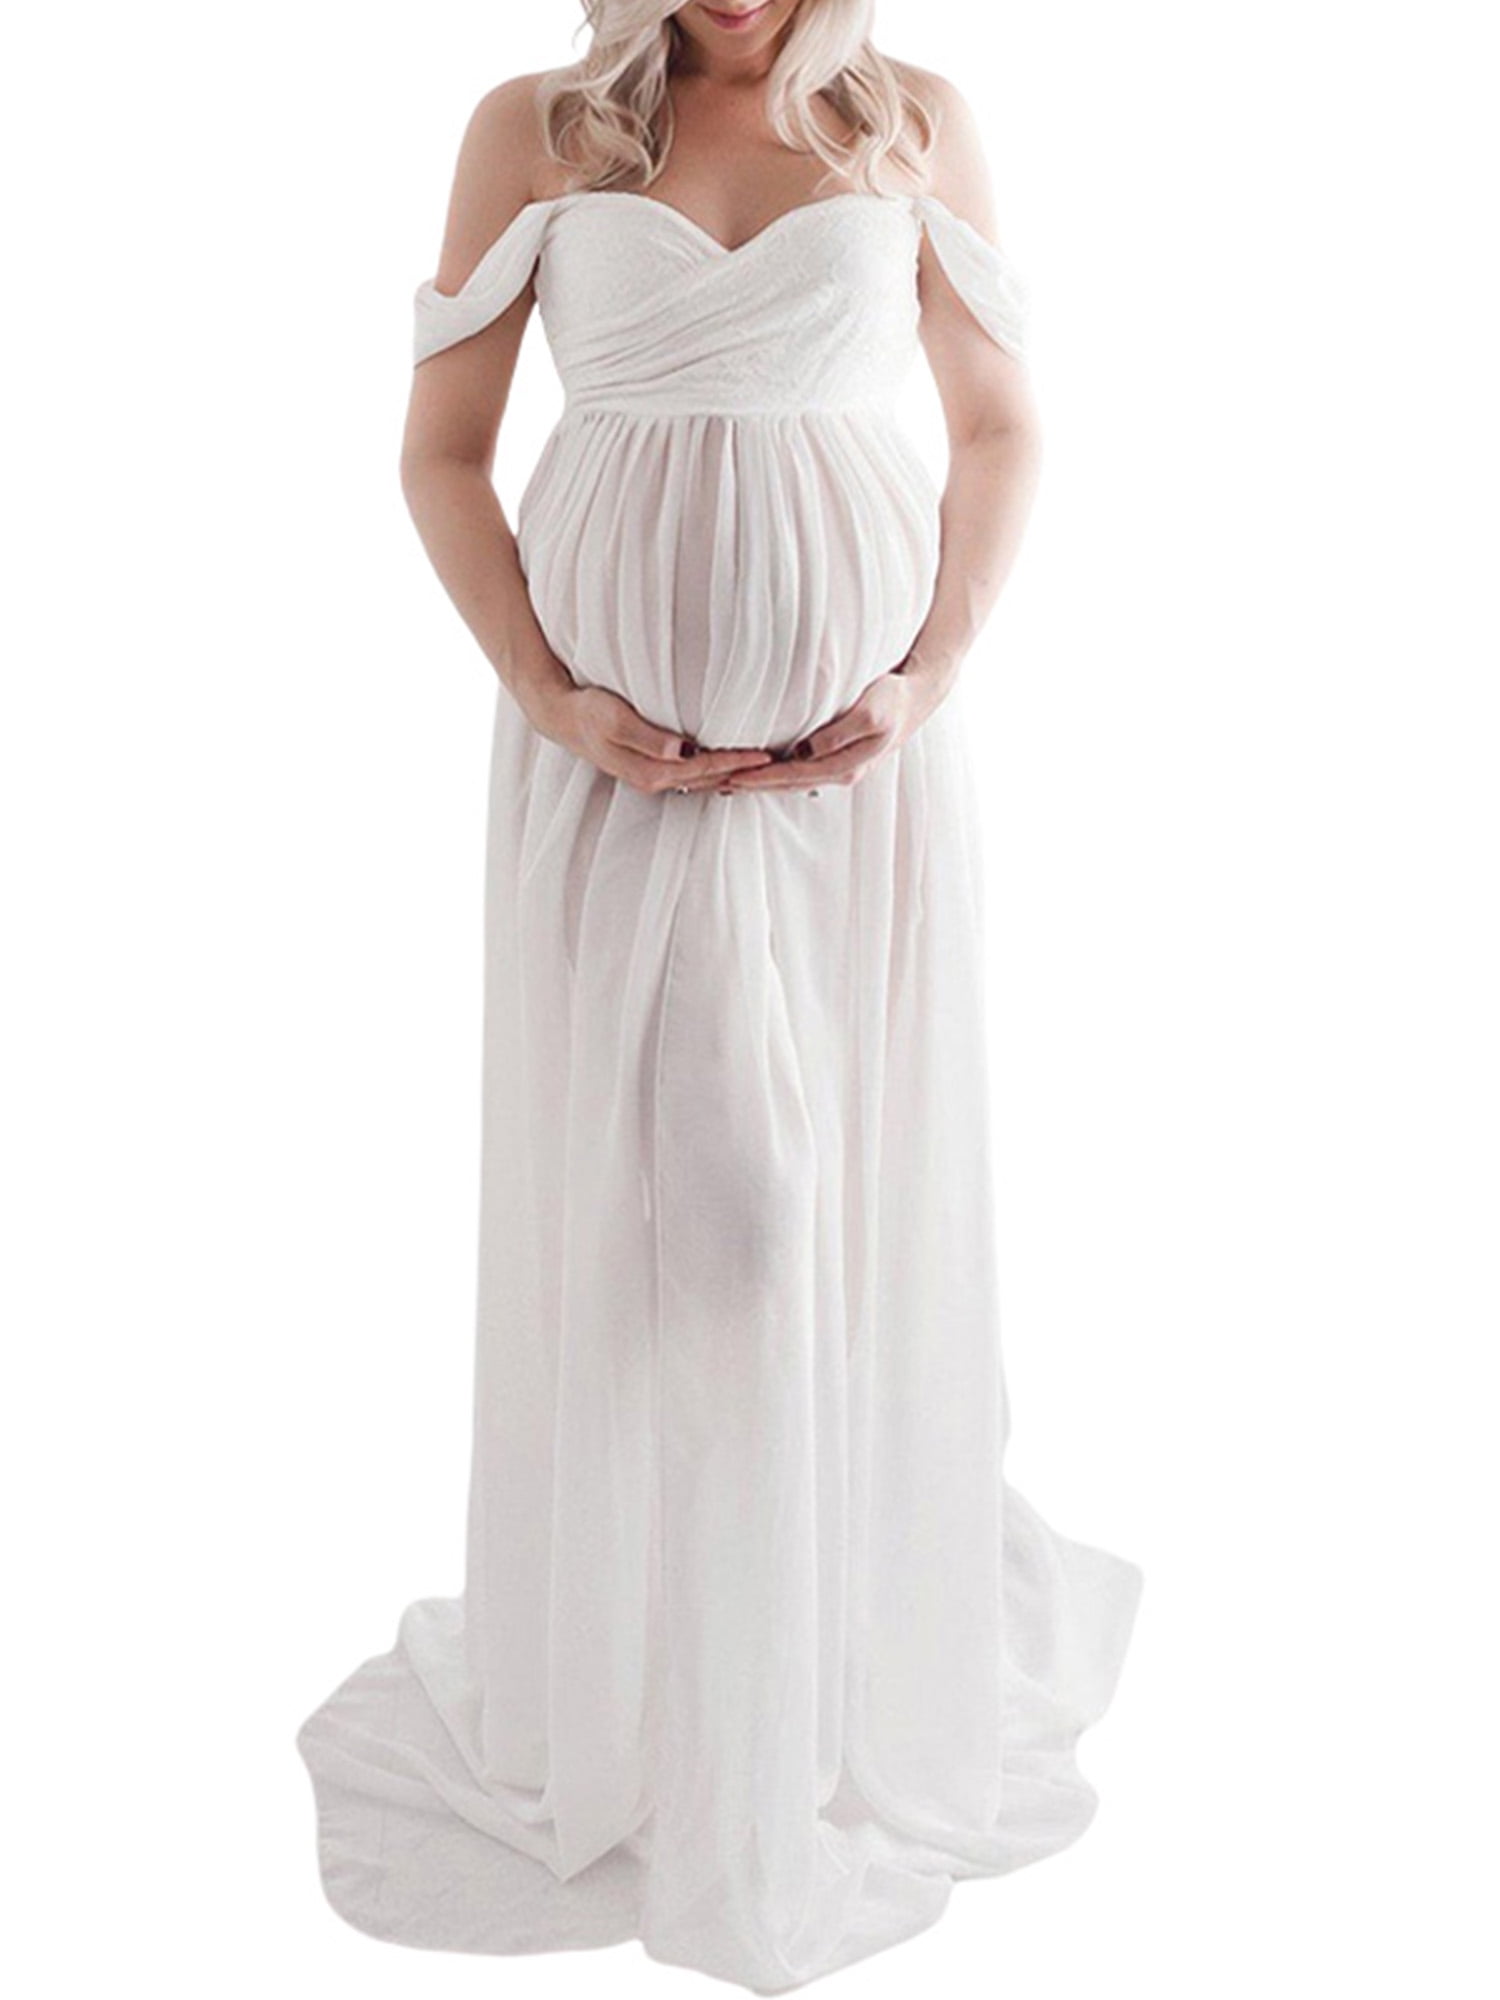 Maternity Dress for Photography Off Shoulder Chiffon Gown Split Front Maxi Pregnancy Dresses for Photoshoot 